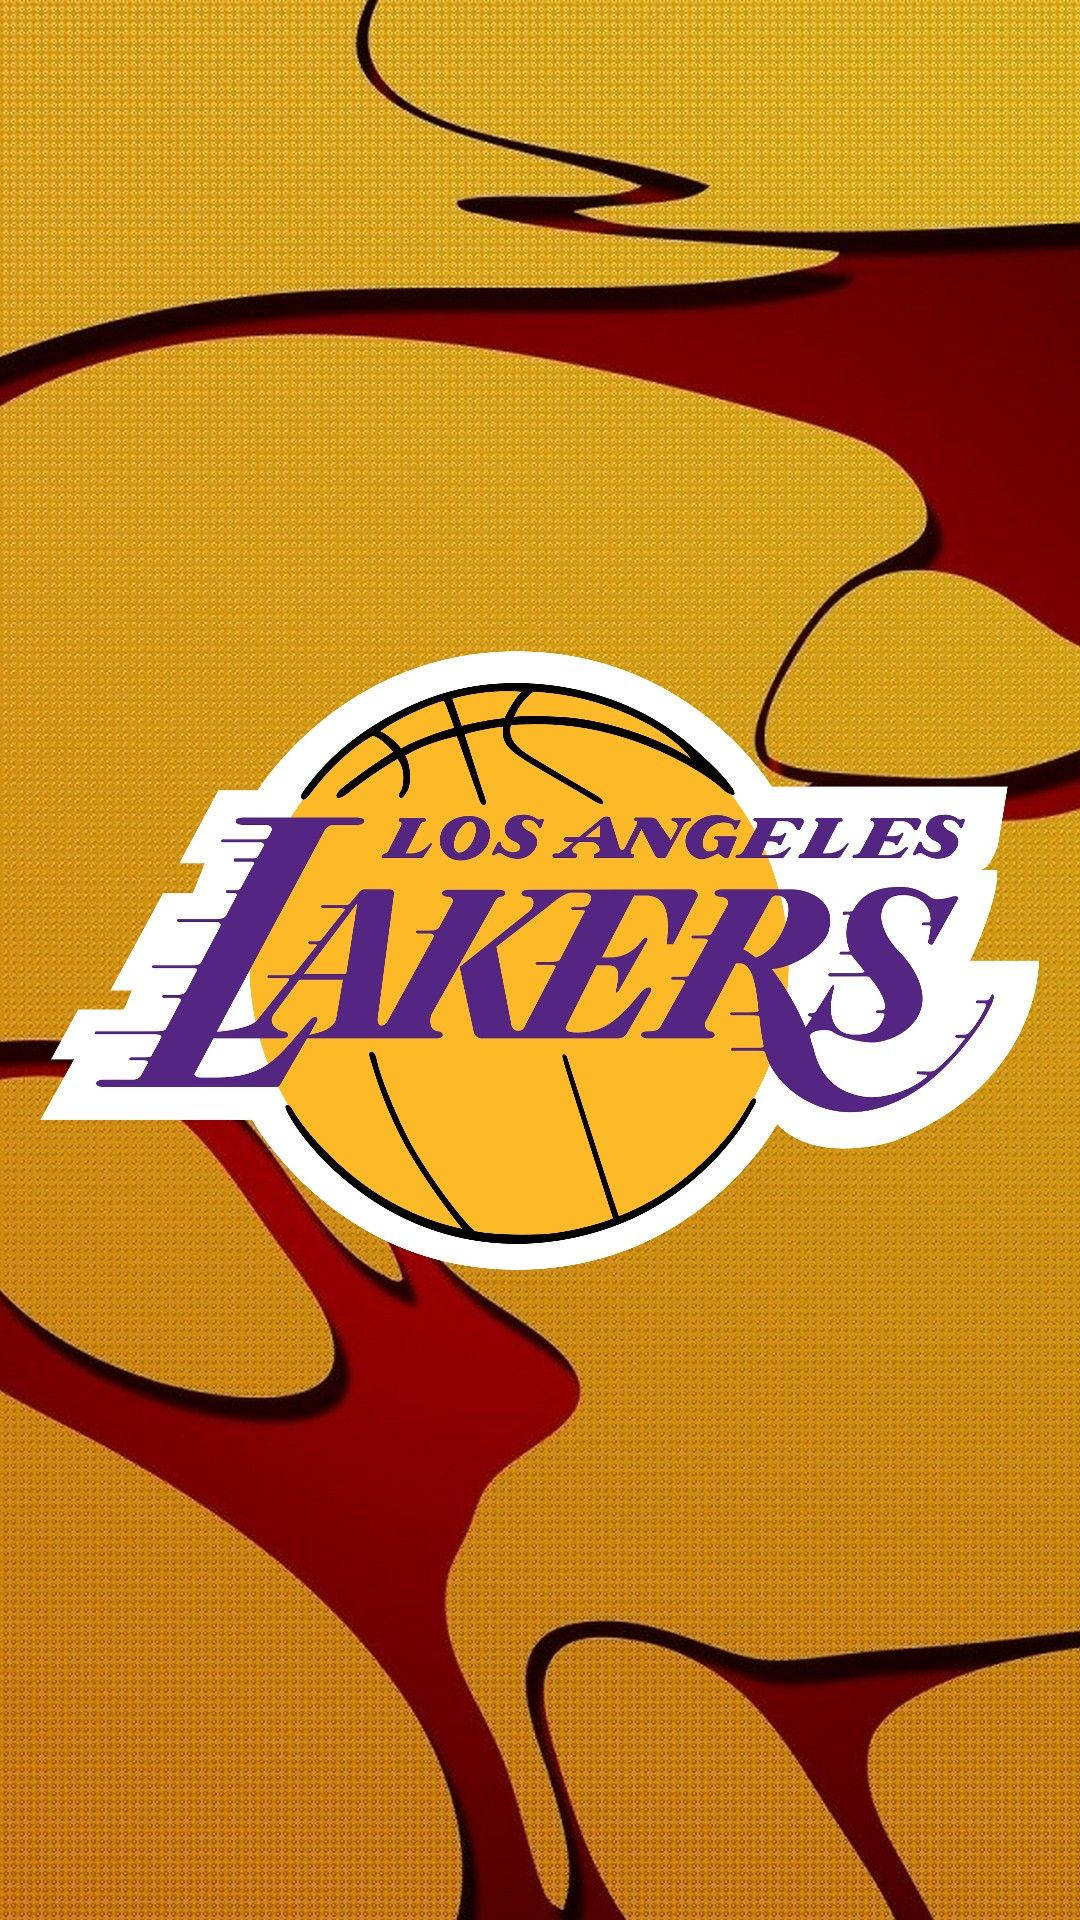 Download The LA Lakers Team Logo on an Iphone. Wallpaper